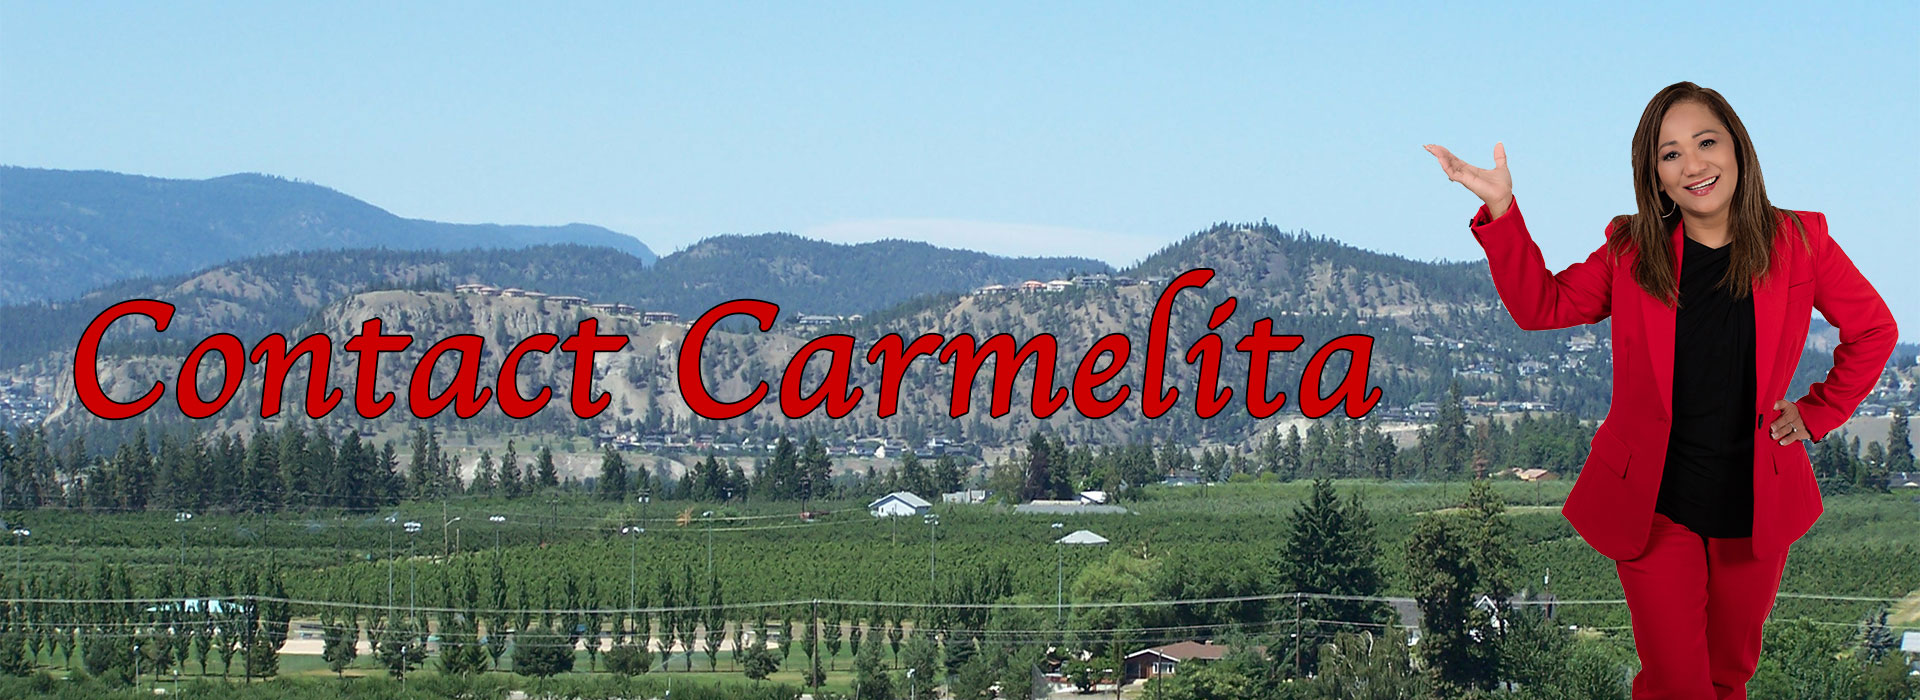 Carmelita Obradovic is an experienced Kelowna realtor ready to help you with all your home buying or seling needs.